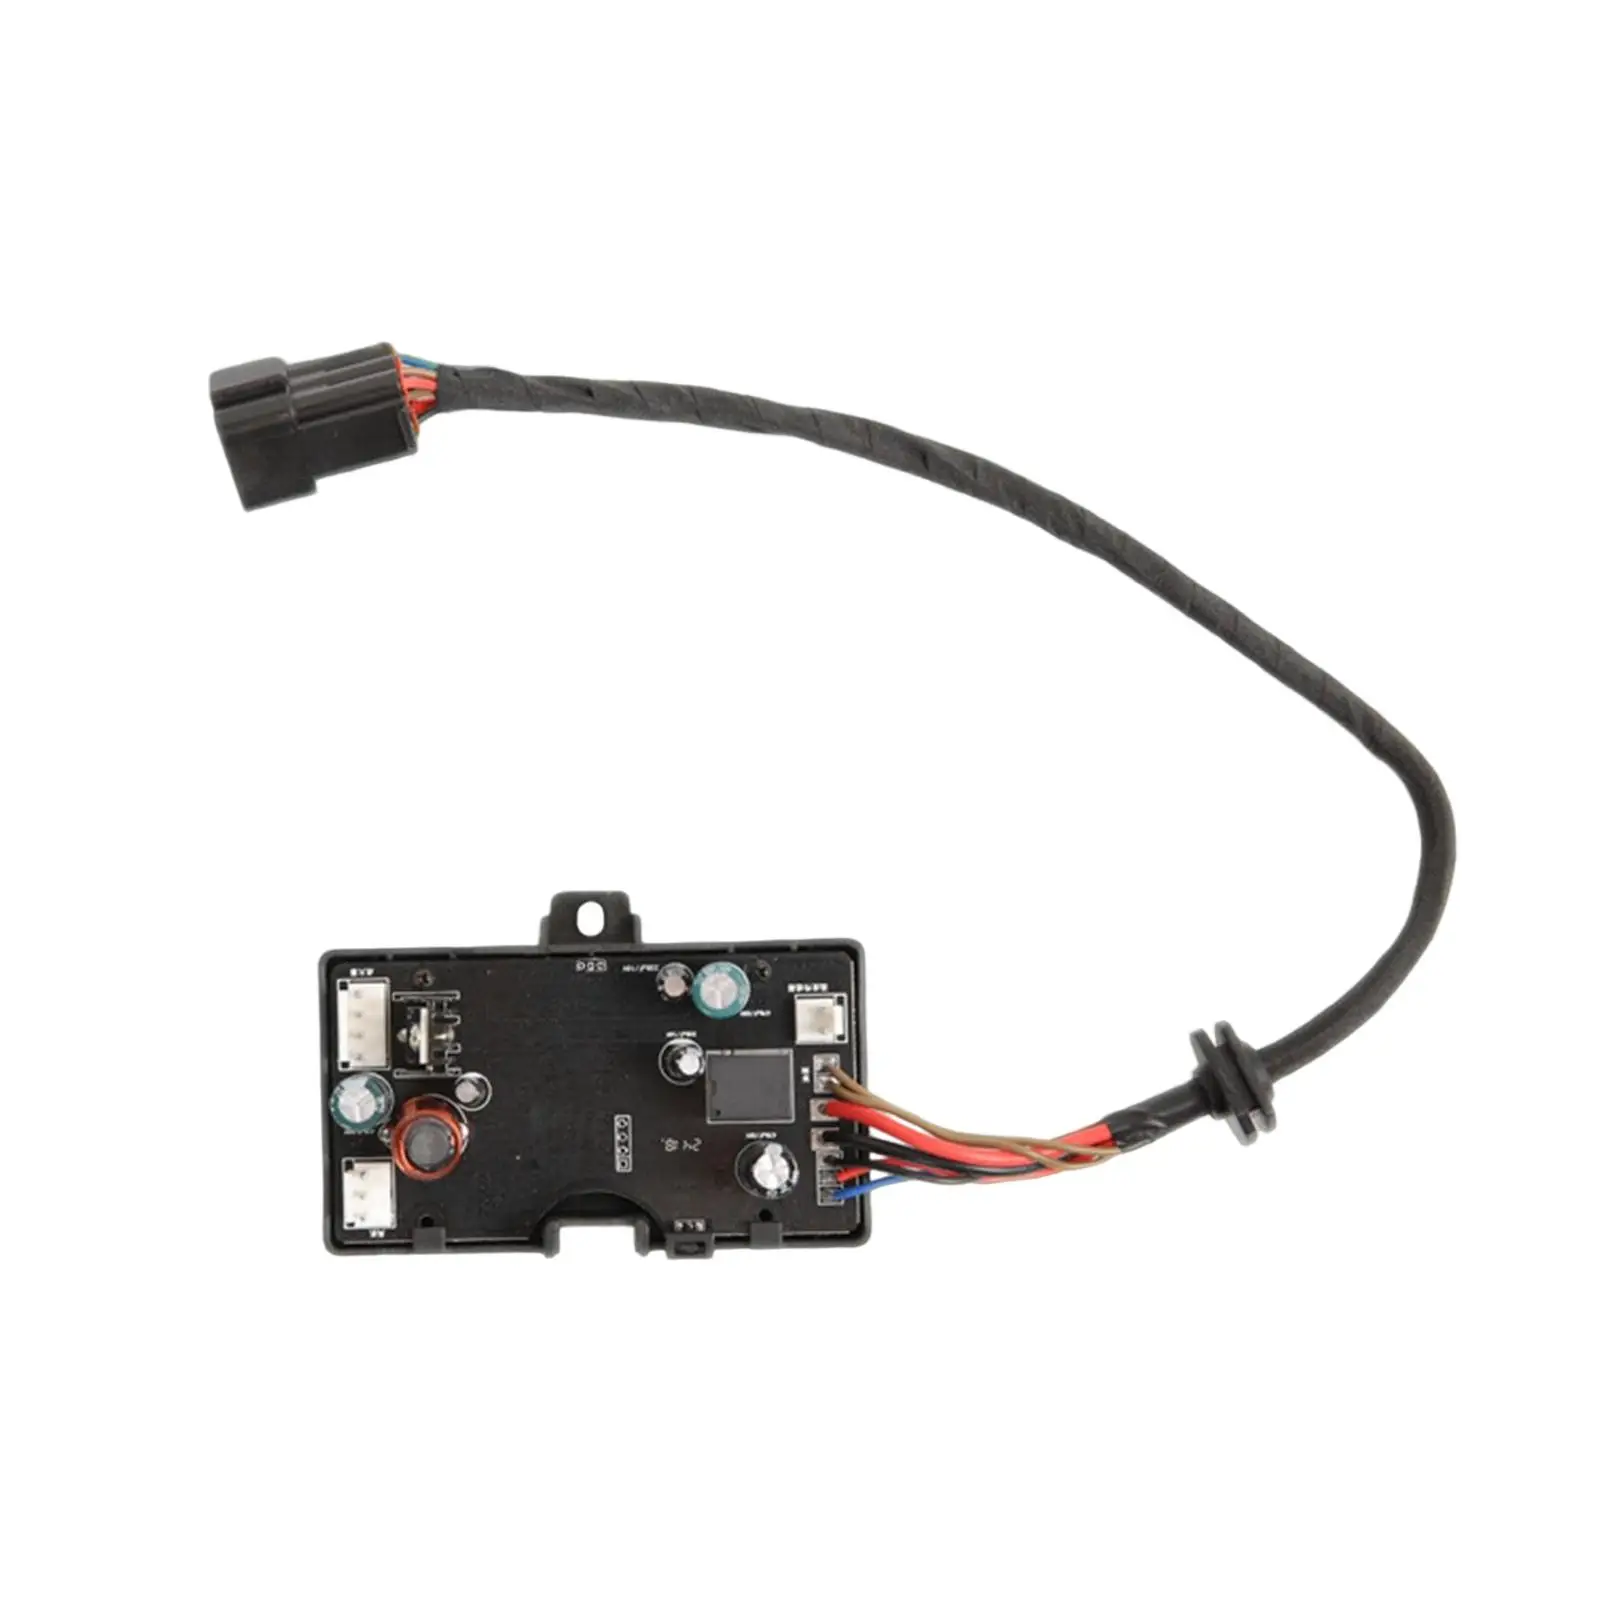 Fuel Air Heater Board Accessories Professional Supply Durable 12V/24V 5kW Tool for Auto Parking Truck